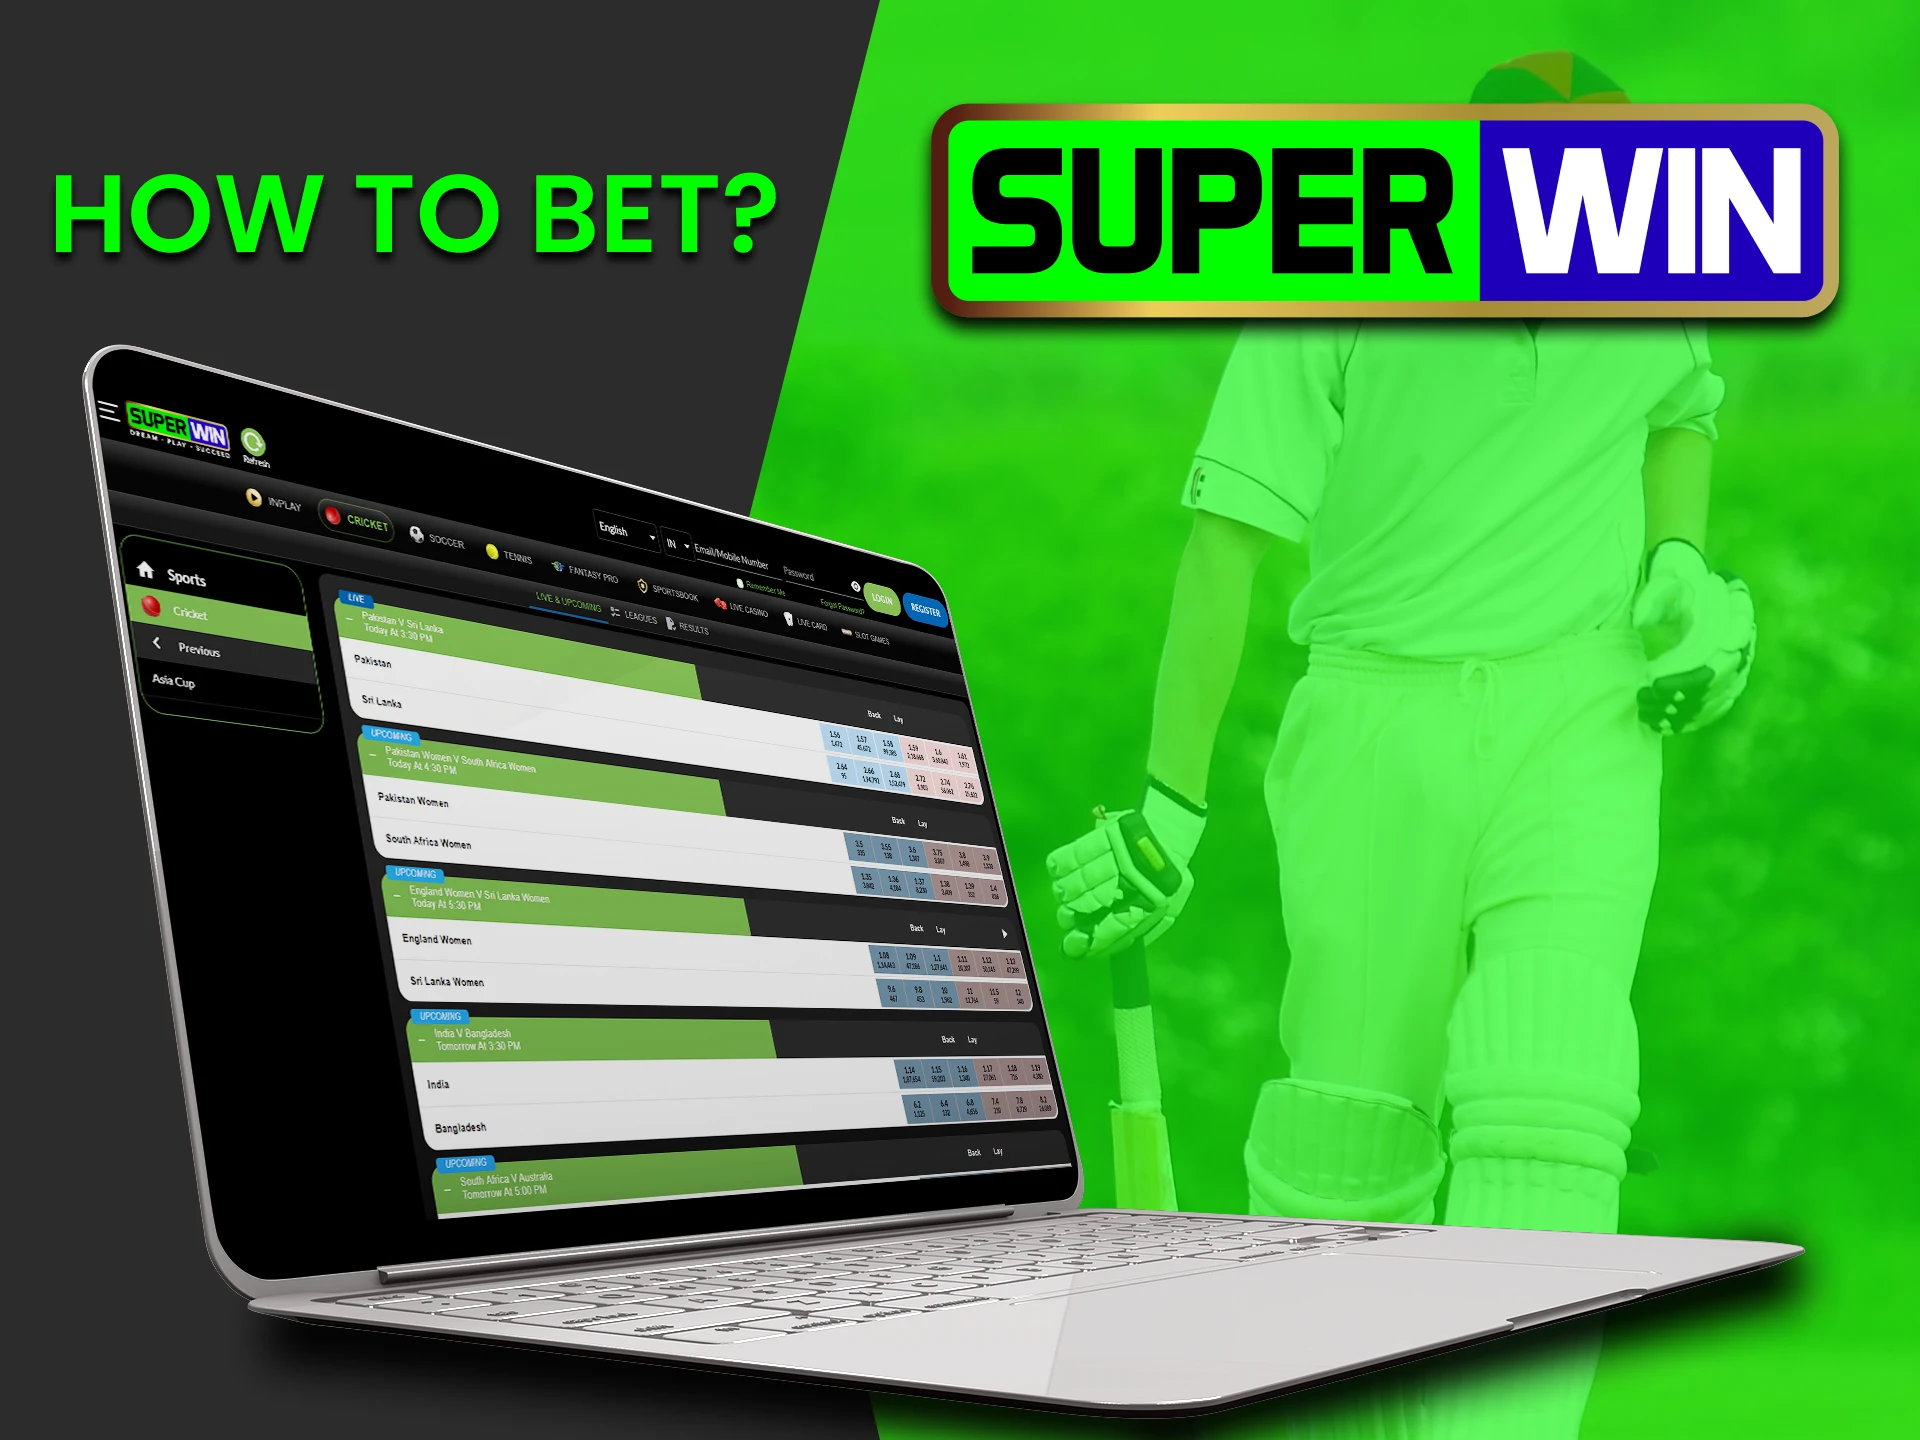 Find out how to place your first bet on Superwin.